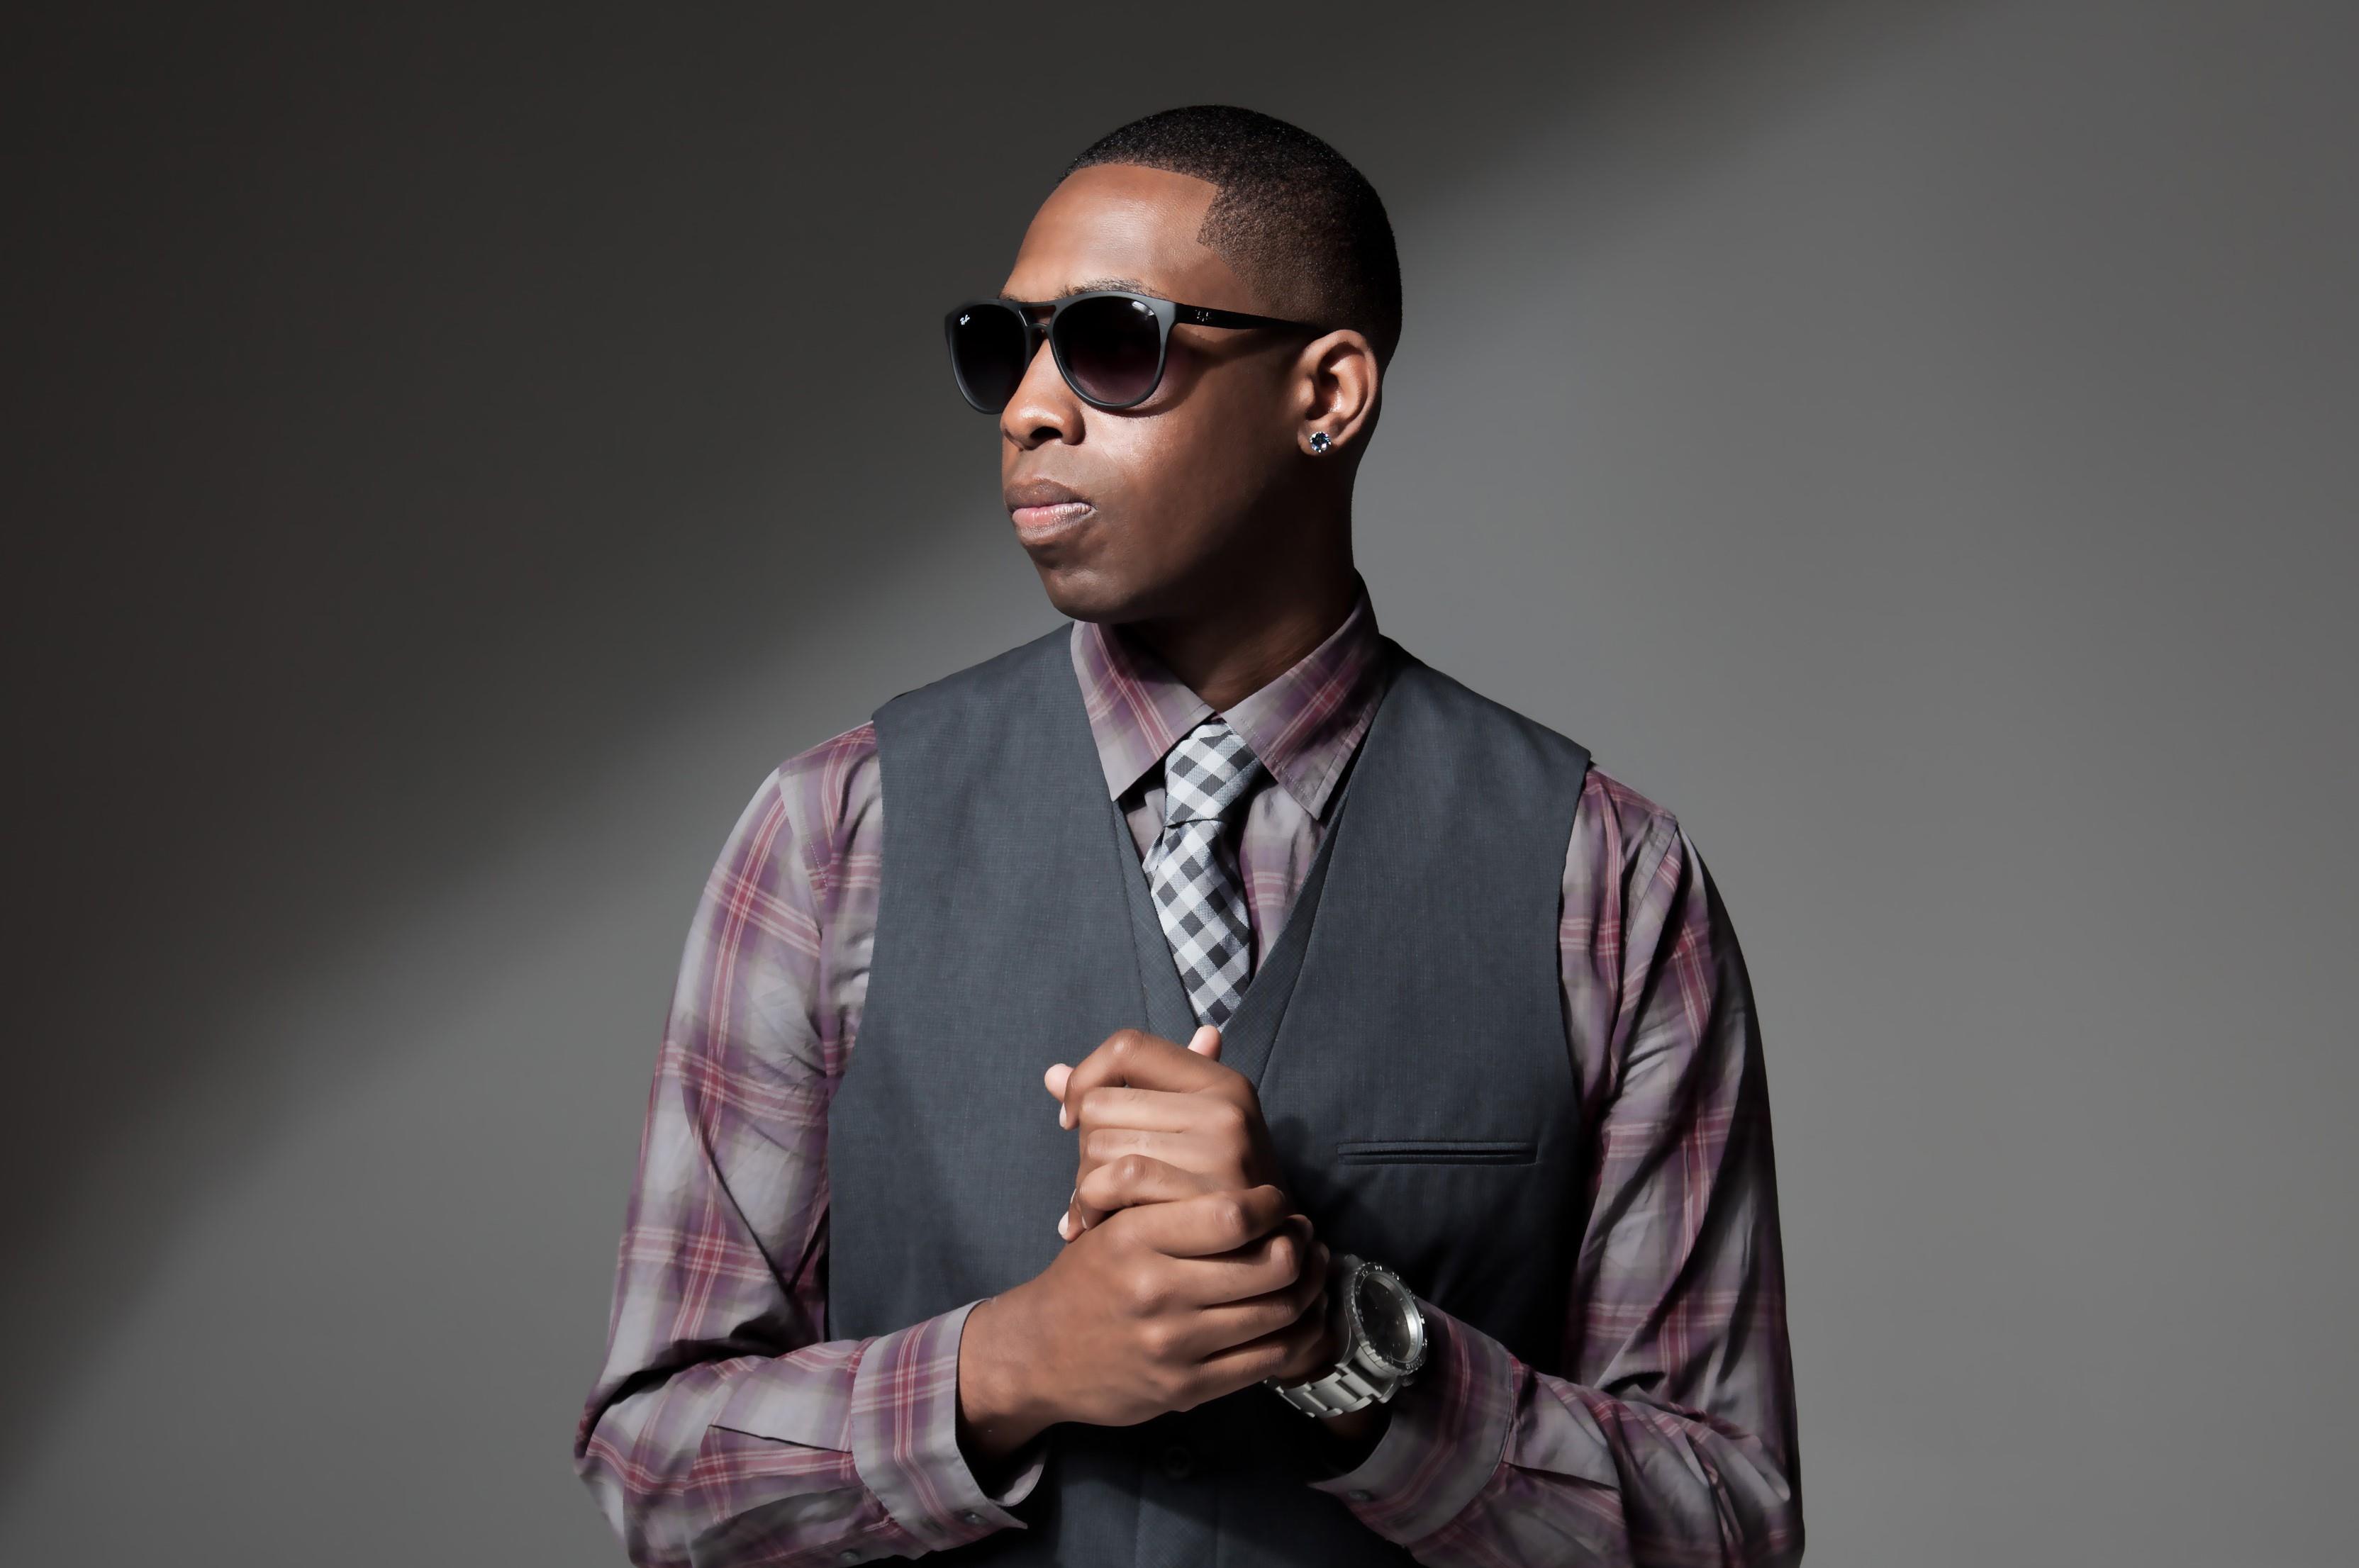 19 Extraordinary Facts About Silkk The Shocker - Facts.net